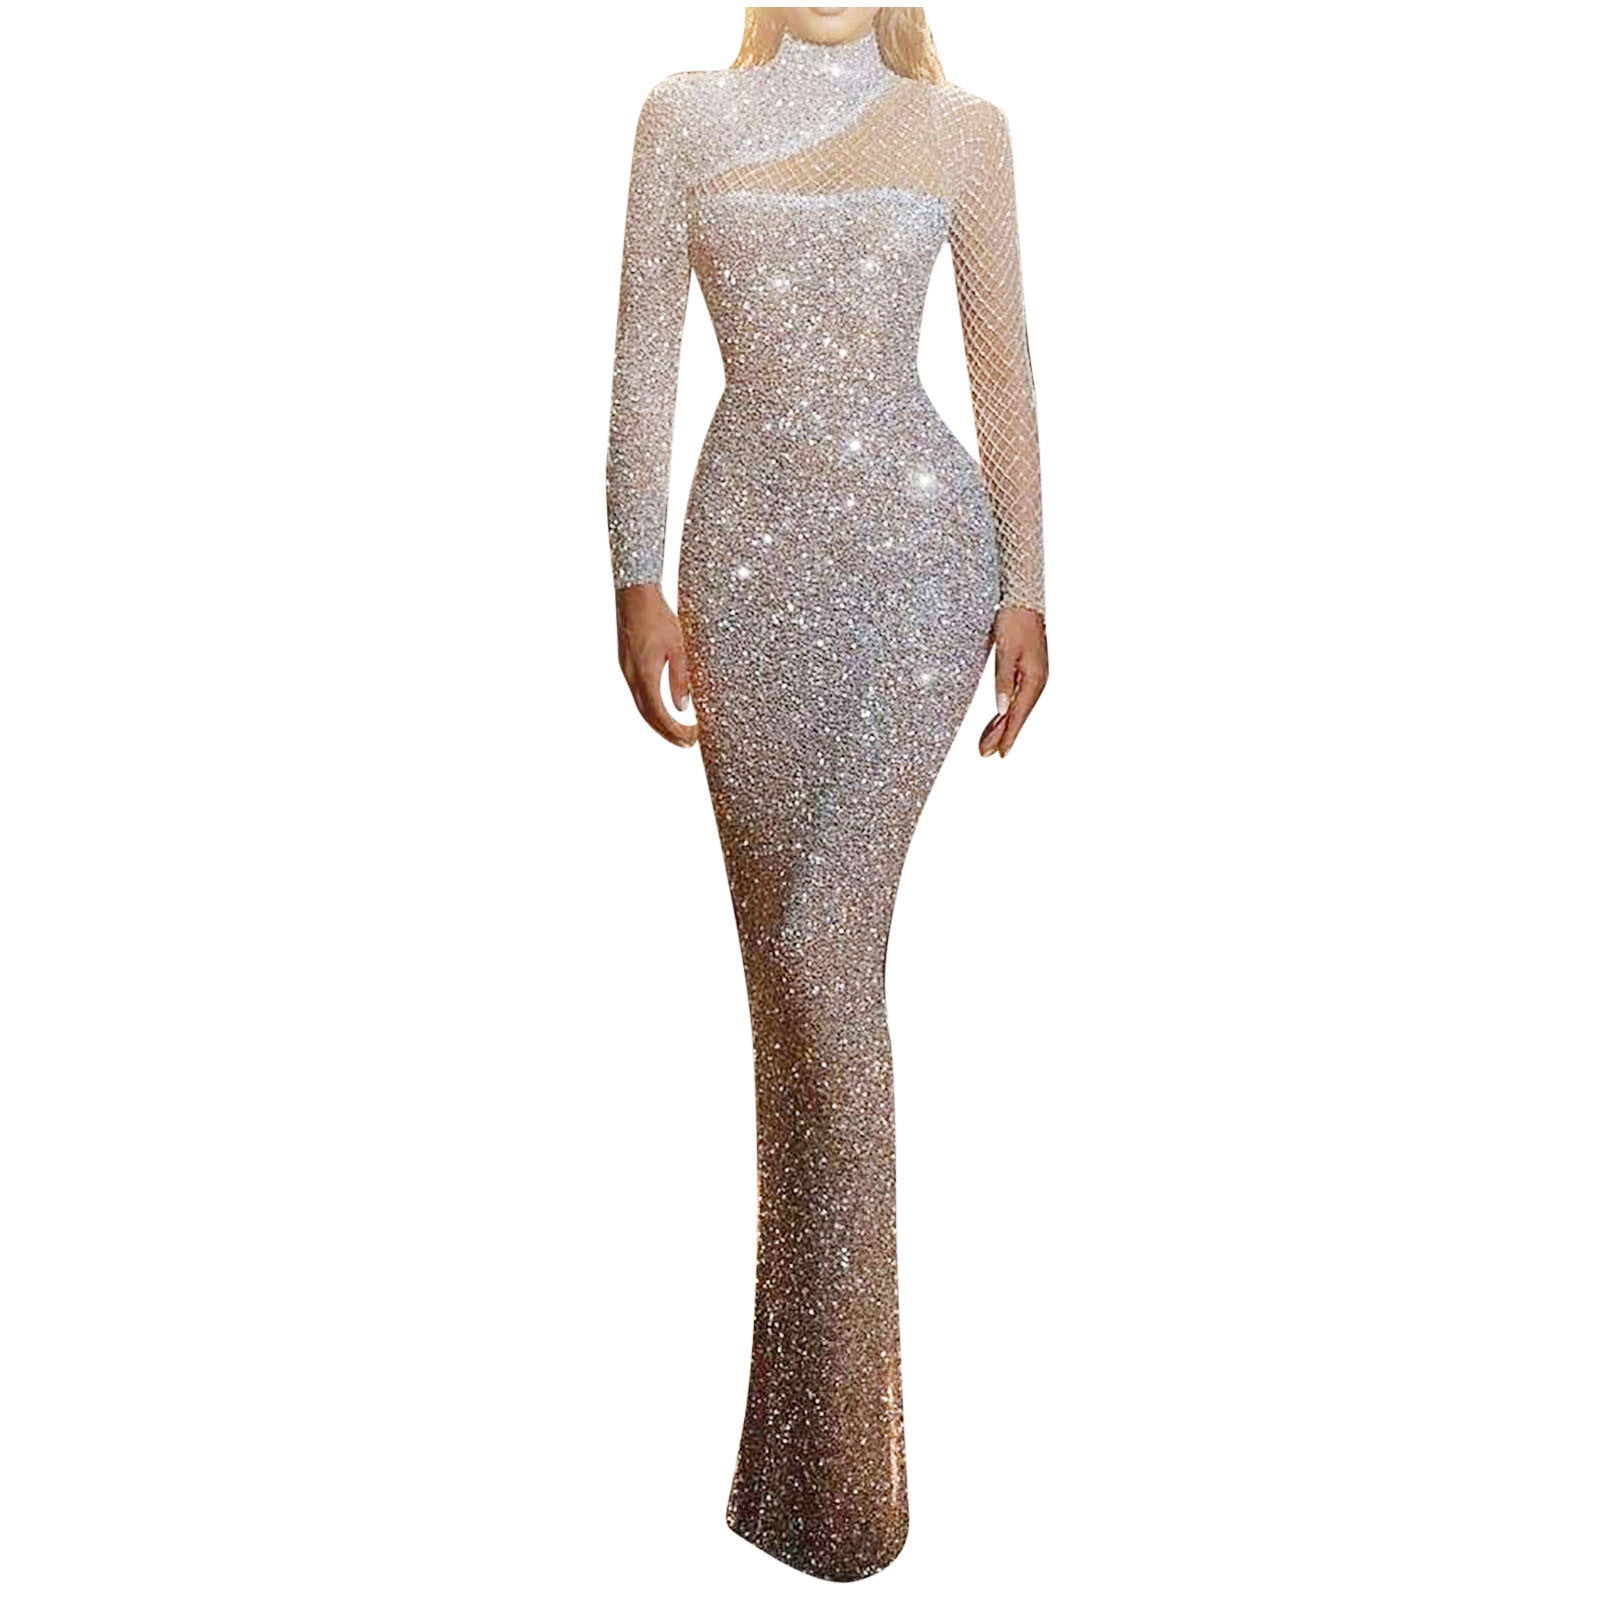 jsaierl Sequin Dress for Women Long Sleeve Mesh Maxi Dress Hollow Out Mock  Neck Slim Prom Evening Party Bodycon Sparkly Dress - Walmart.com